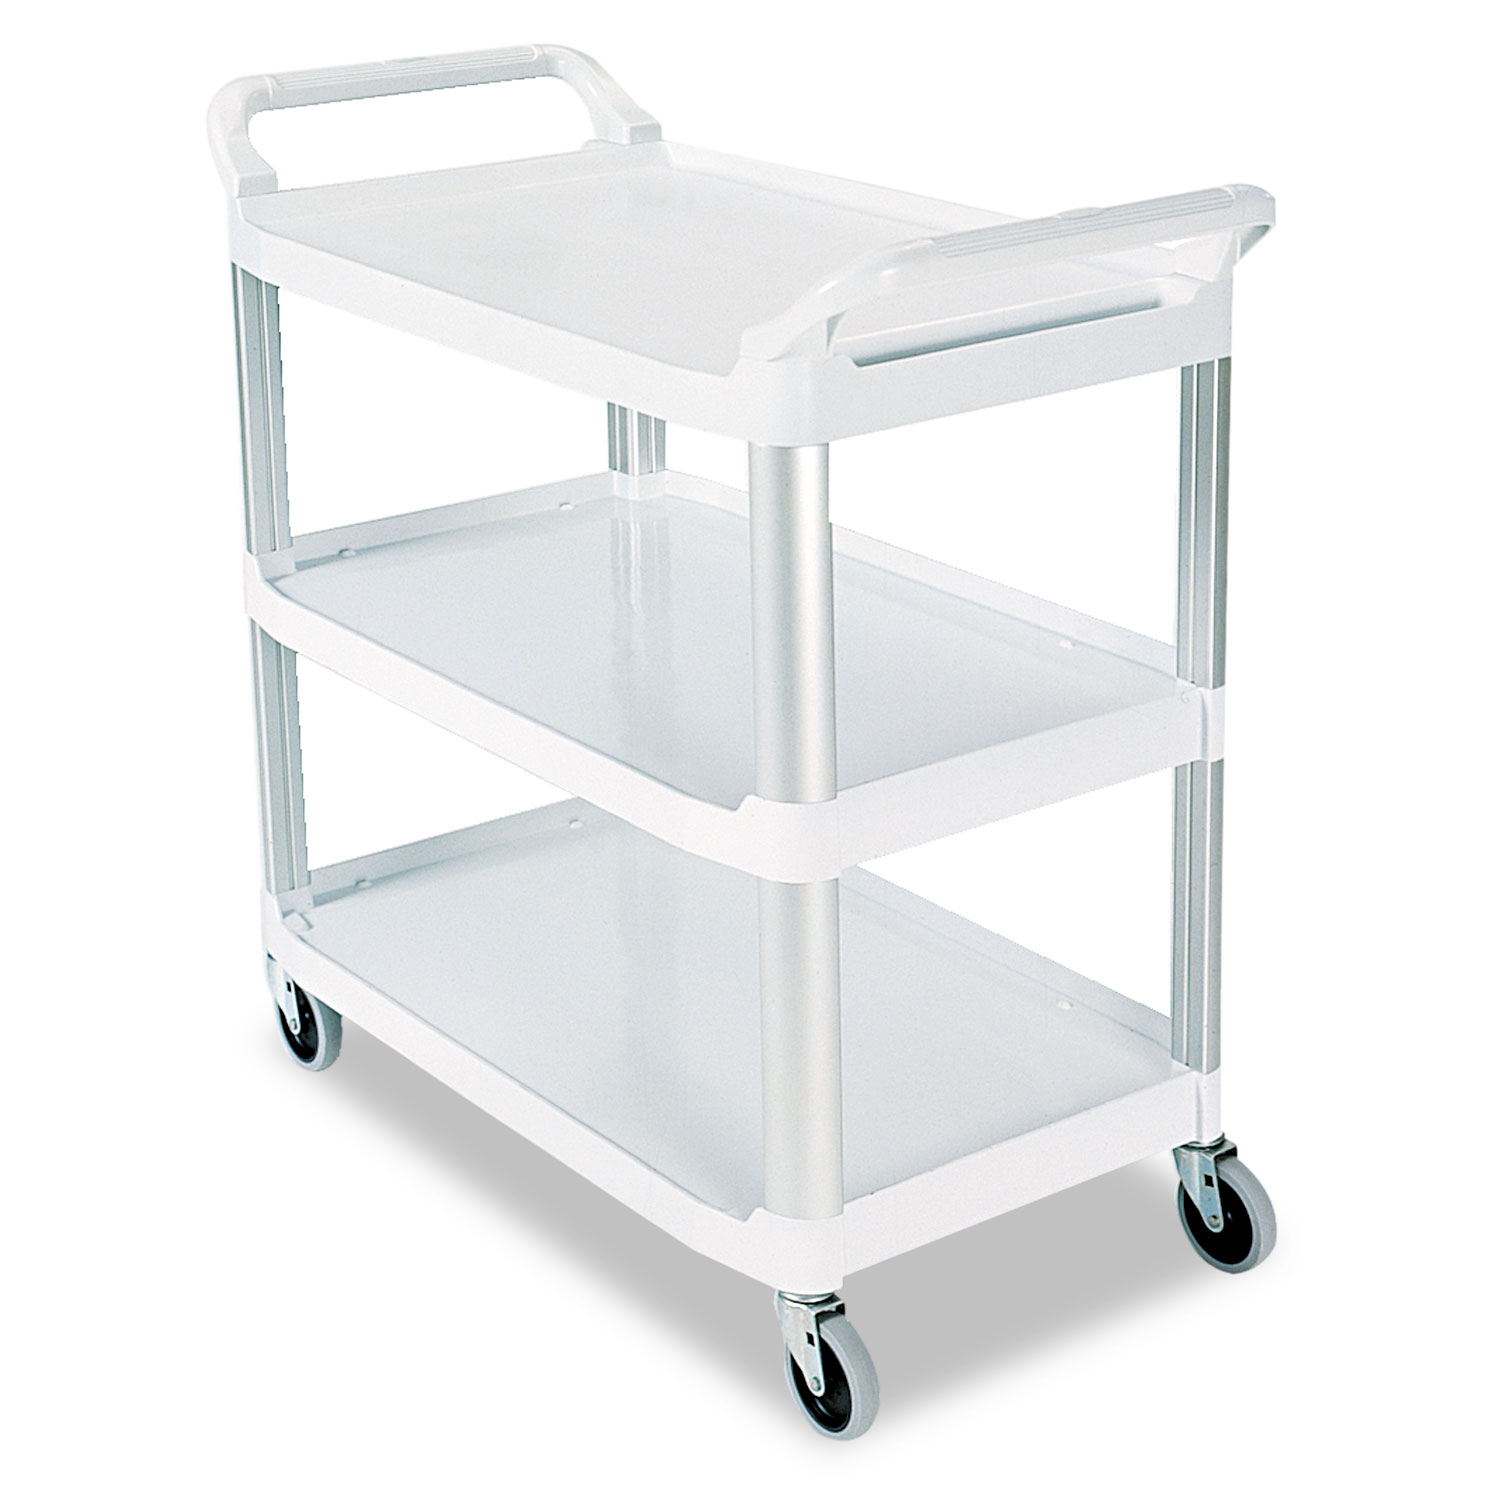  Rubbermaid Commercial FG409100OWHT Open Sided Utility Cart, Three-Shelf, 40.63w x 20d x 37.81h, Off-White (RCP409100CM) 